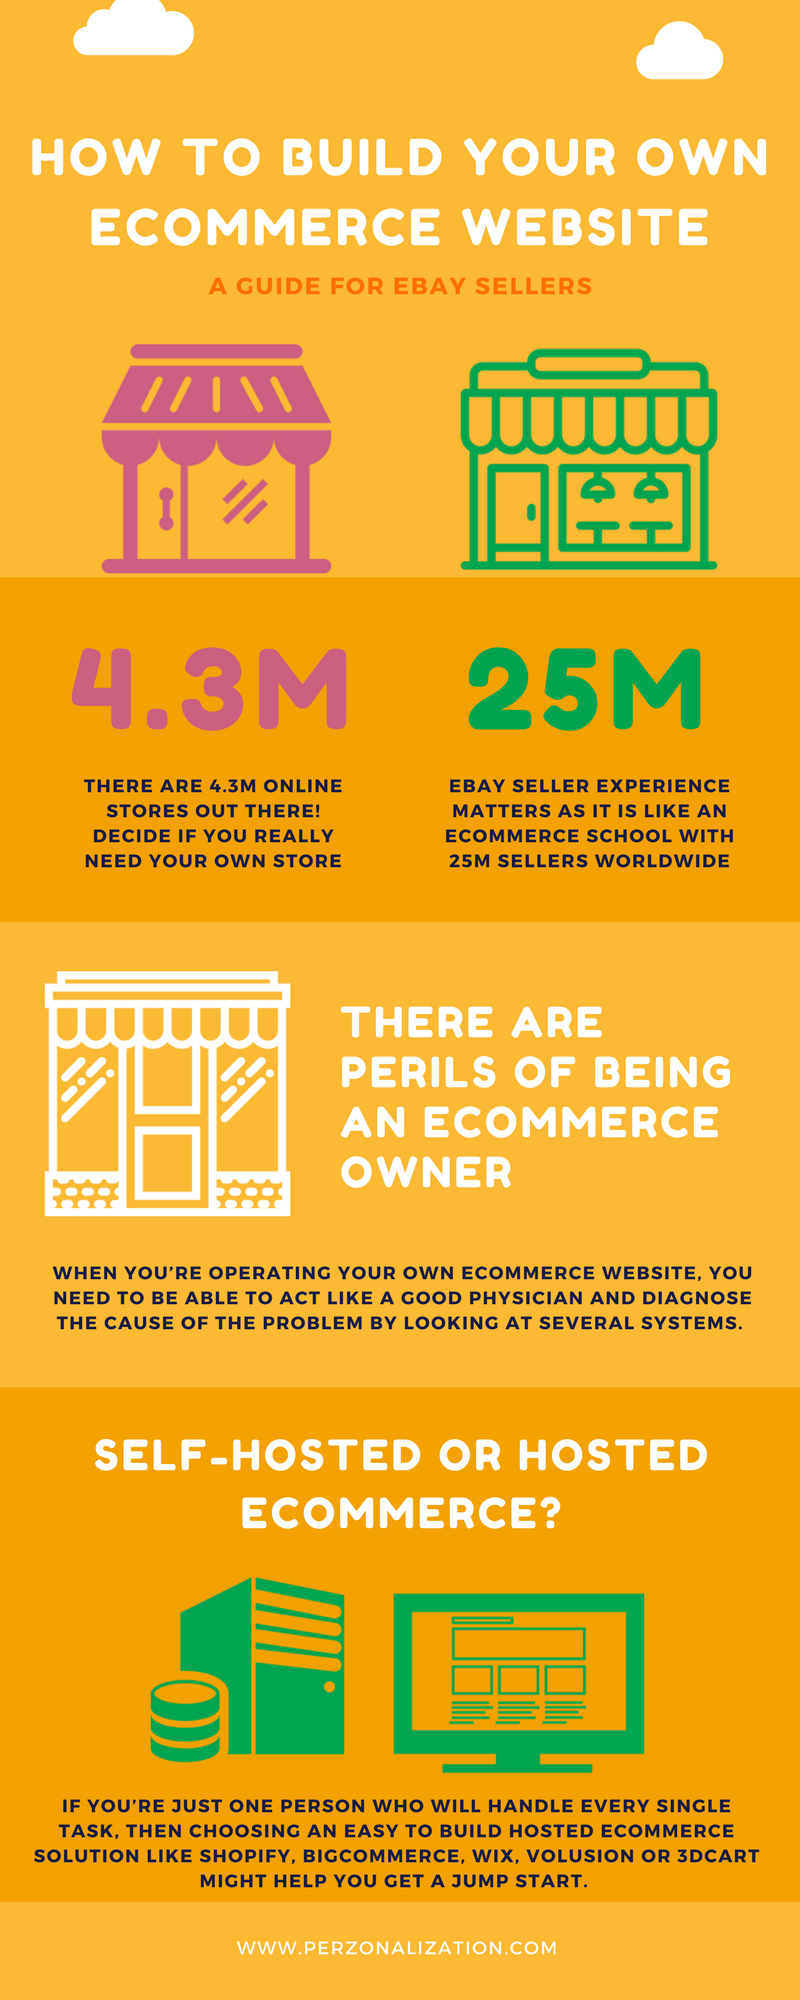 how to build your own ecommerce website